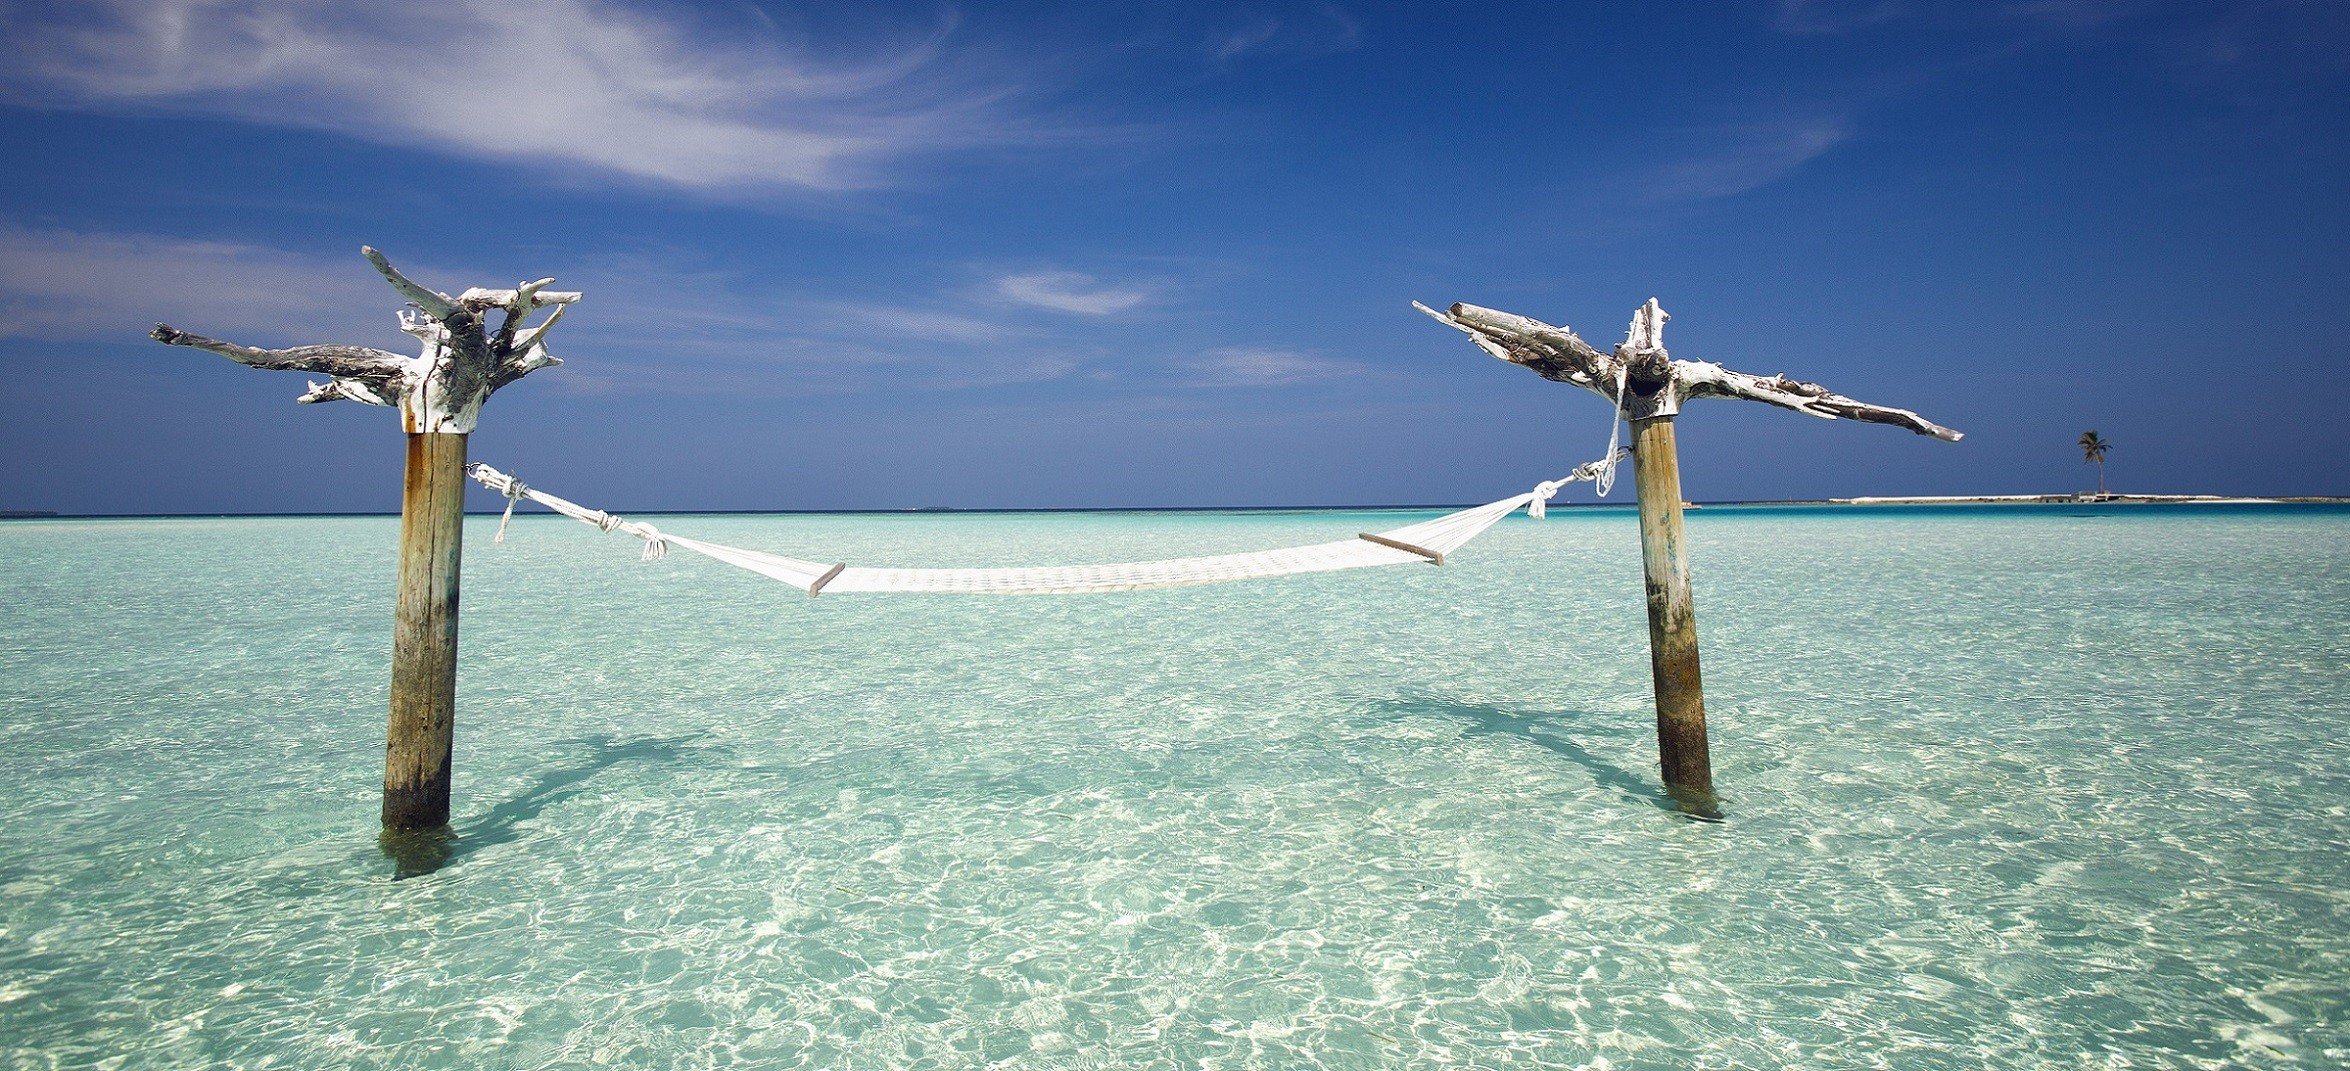 Enjoy the crystal-clear waters of the Maldives on your next getaway. Photos: Lightfoot Travel